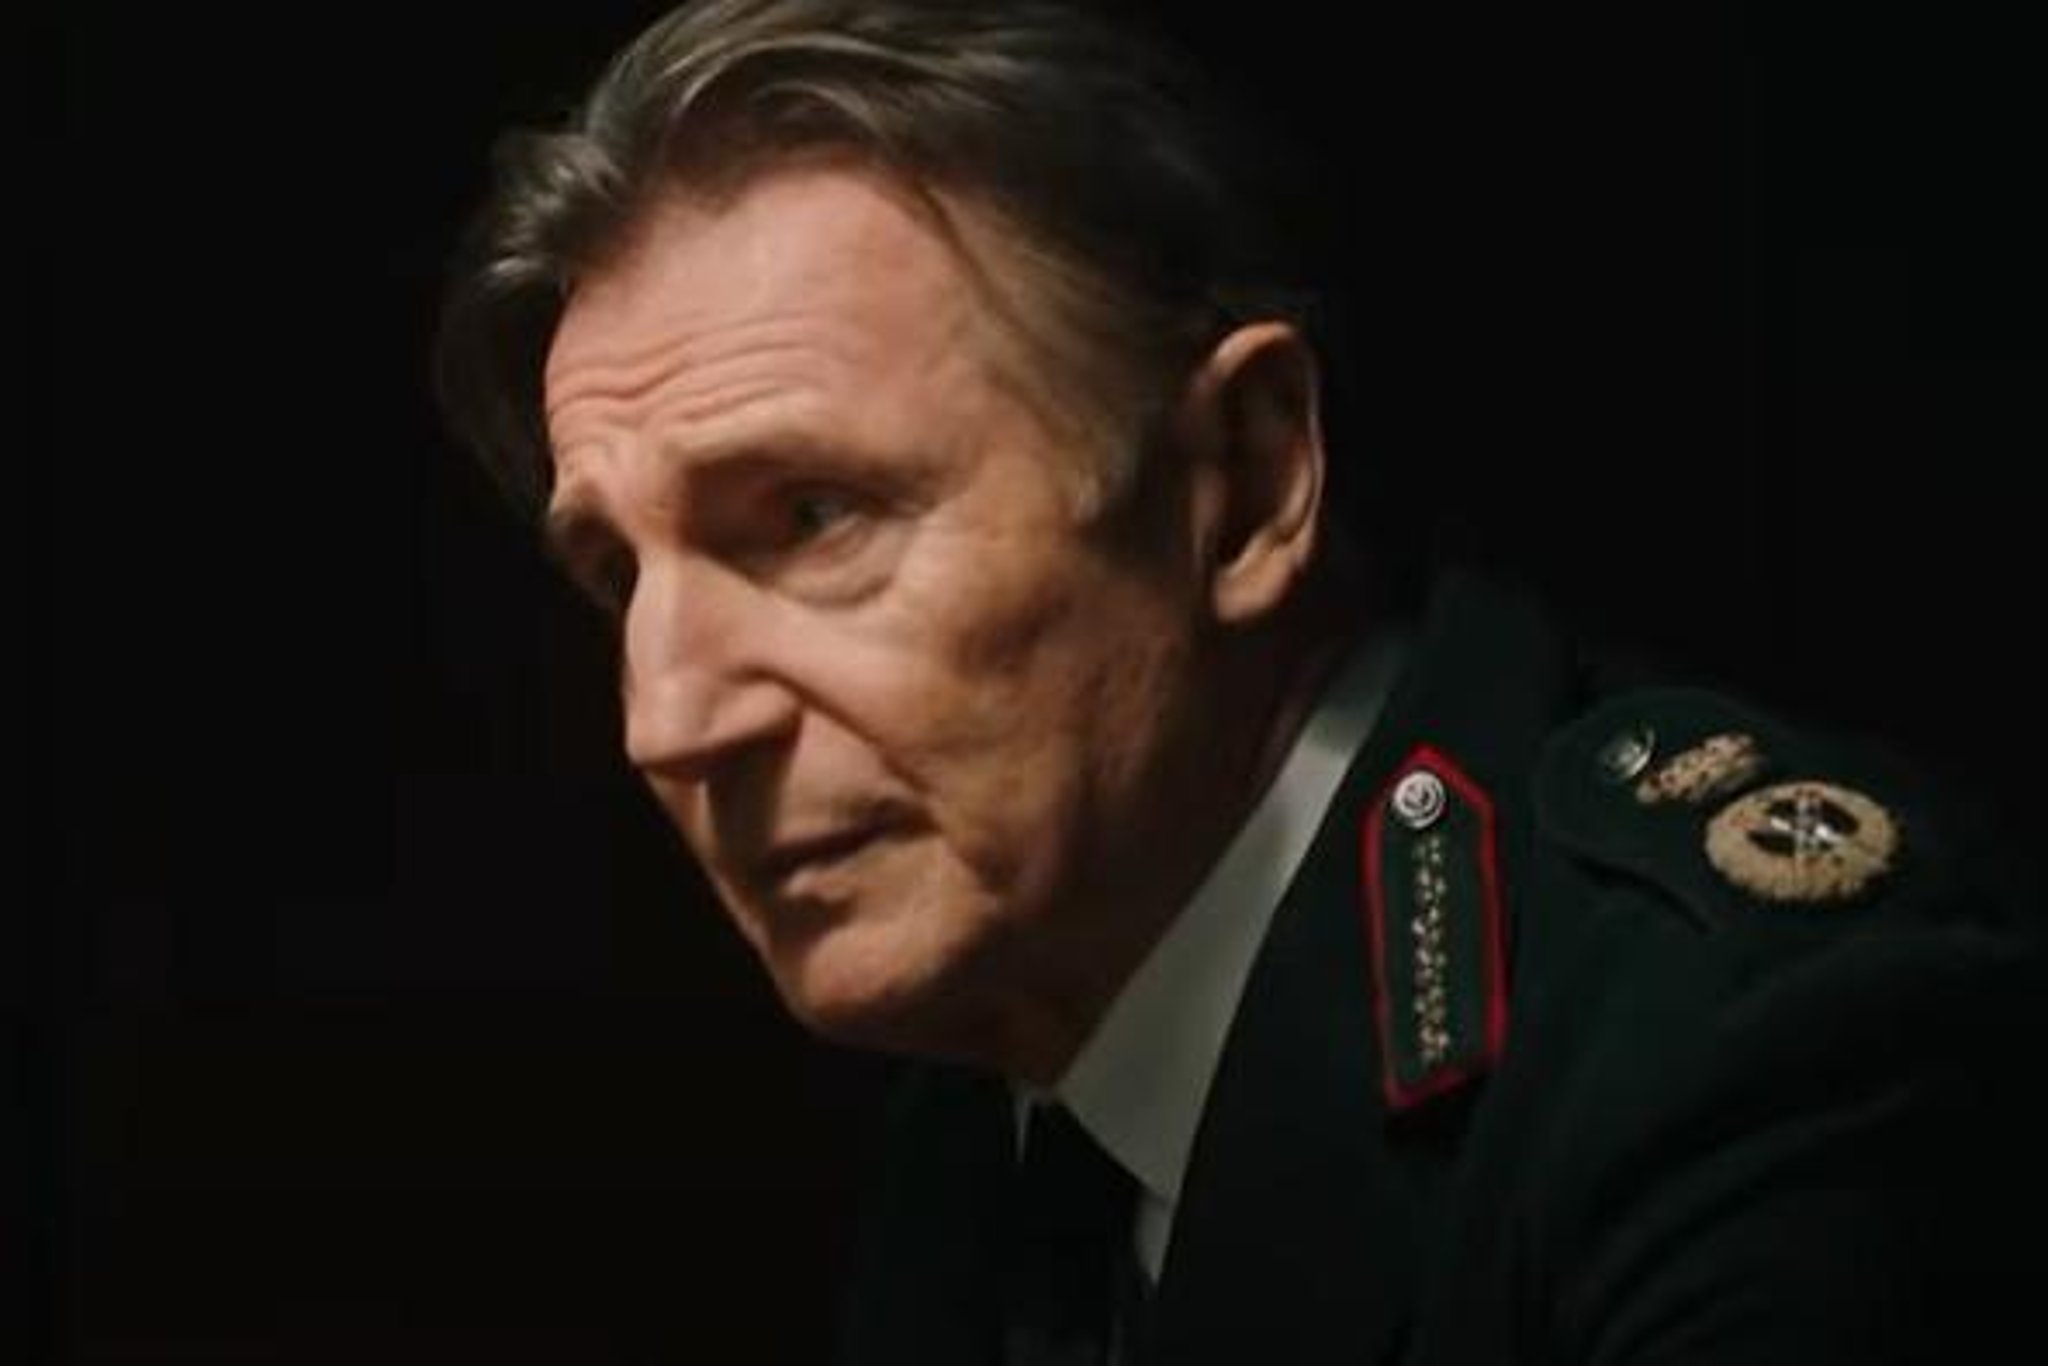 Derry Girls: Fans react to Liam Neeson's RUC officer cameo being asked 'How many Catholic officers are in the RUC?'